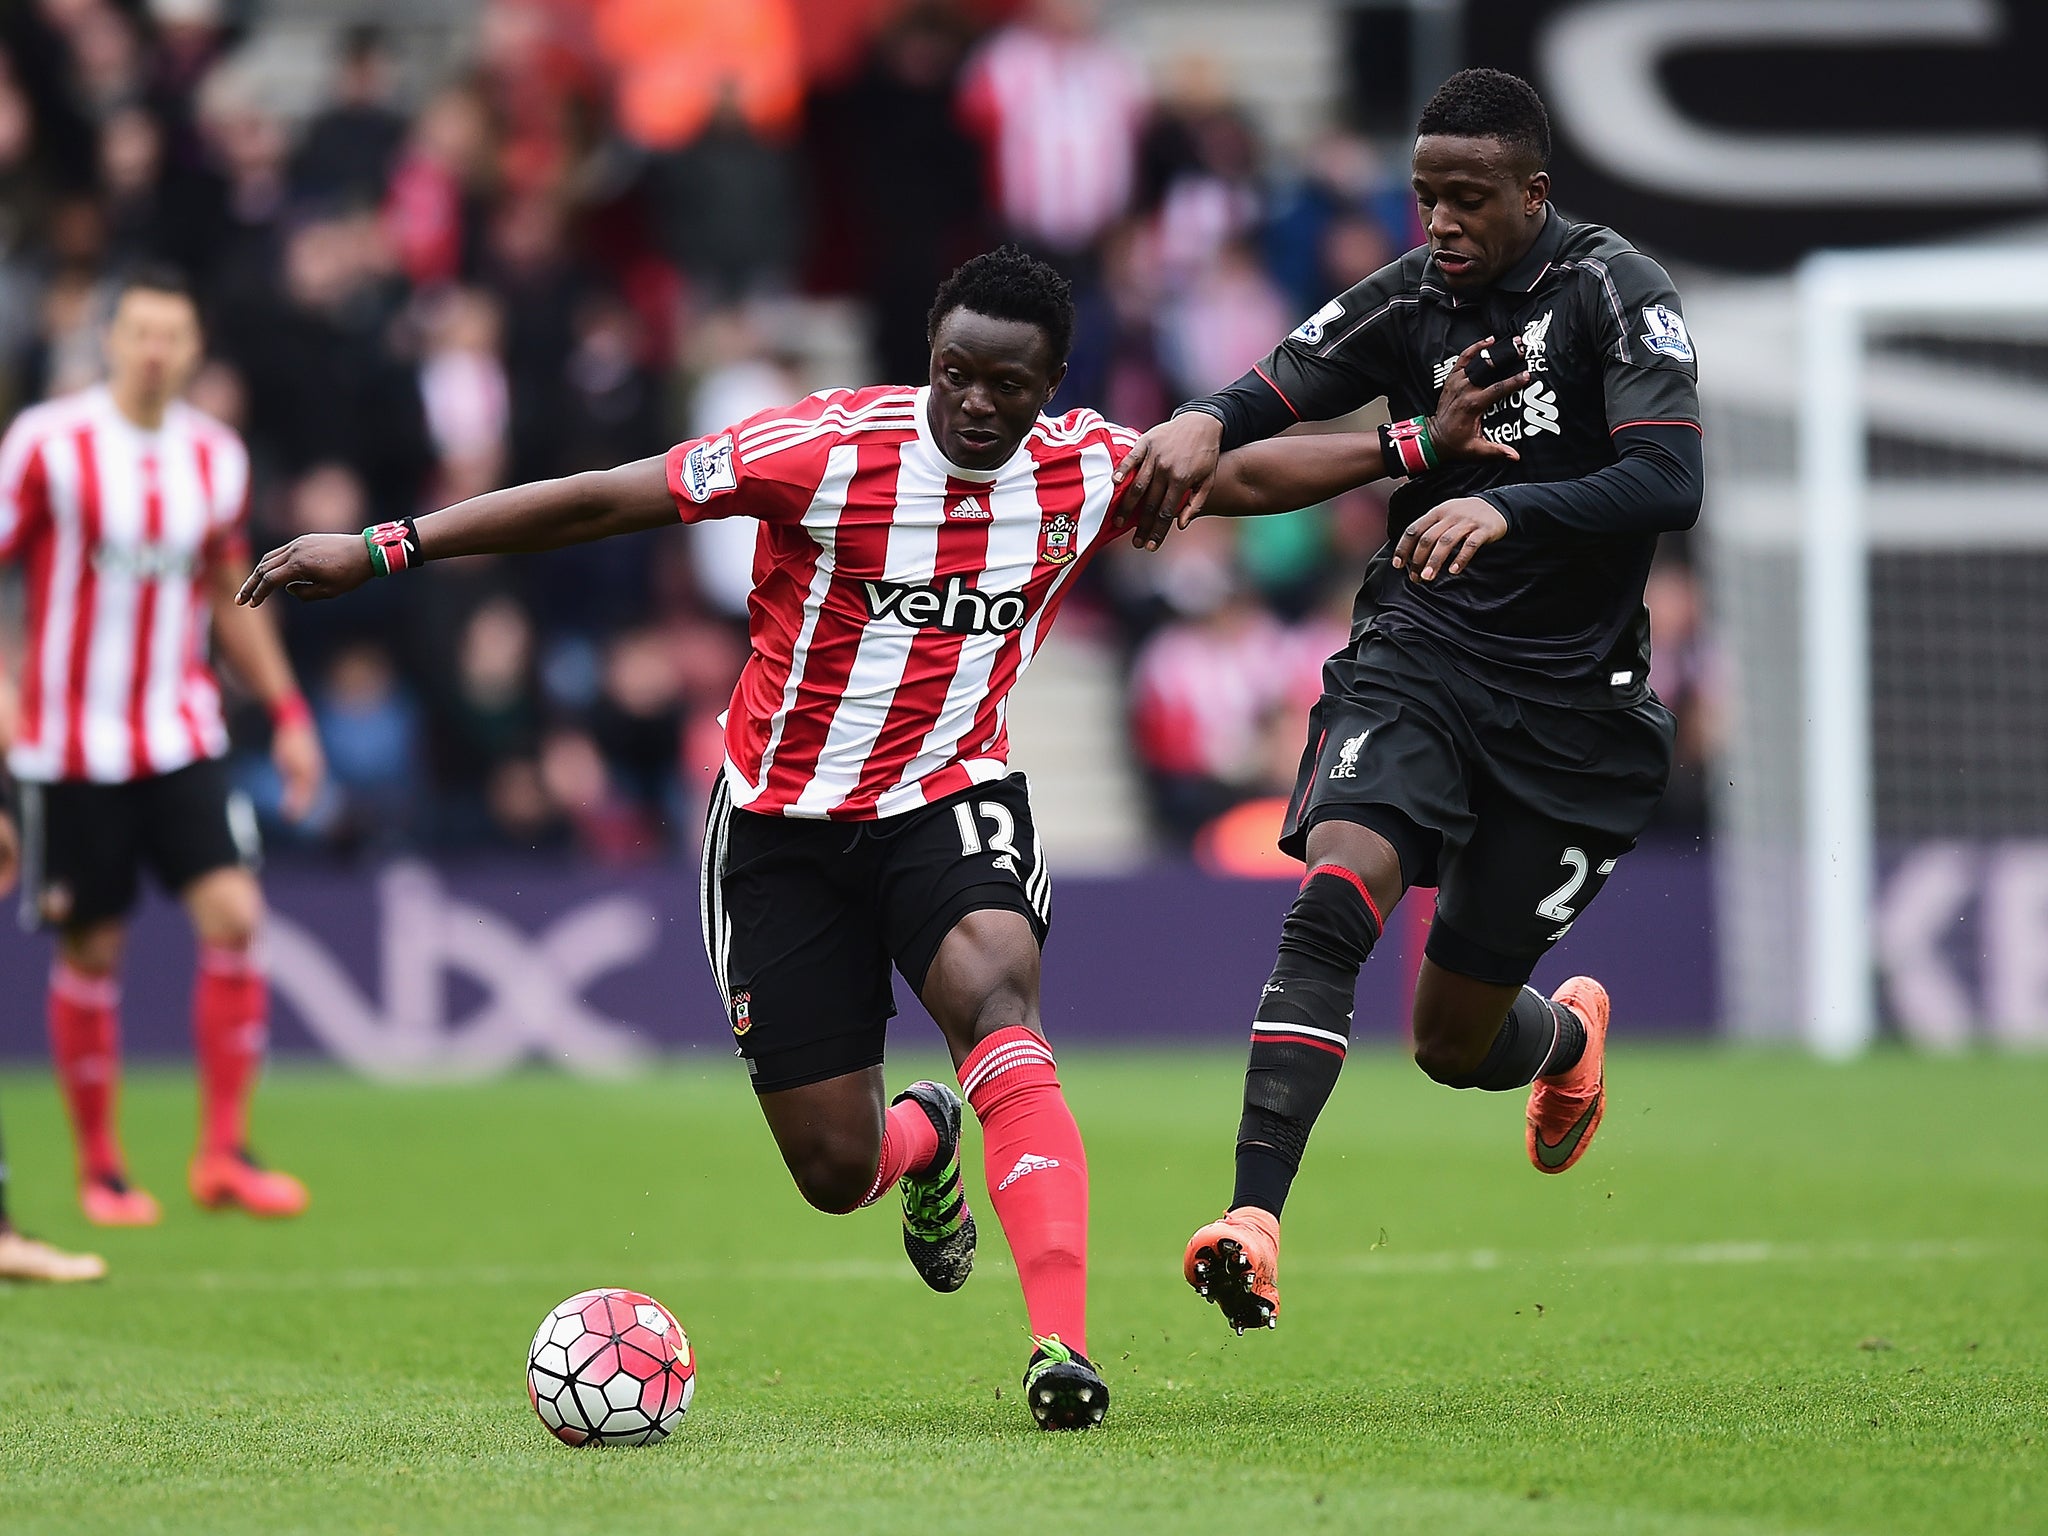 Wanyama's move to Tottenham is all-but confirmed